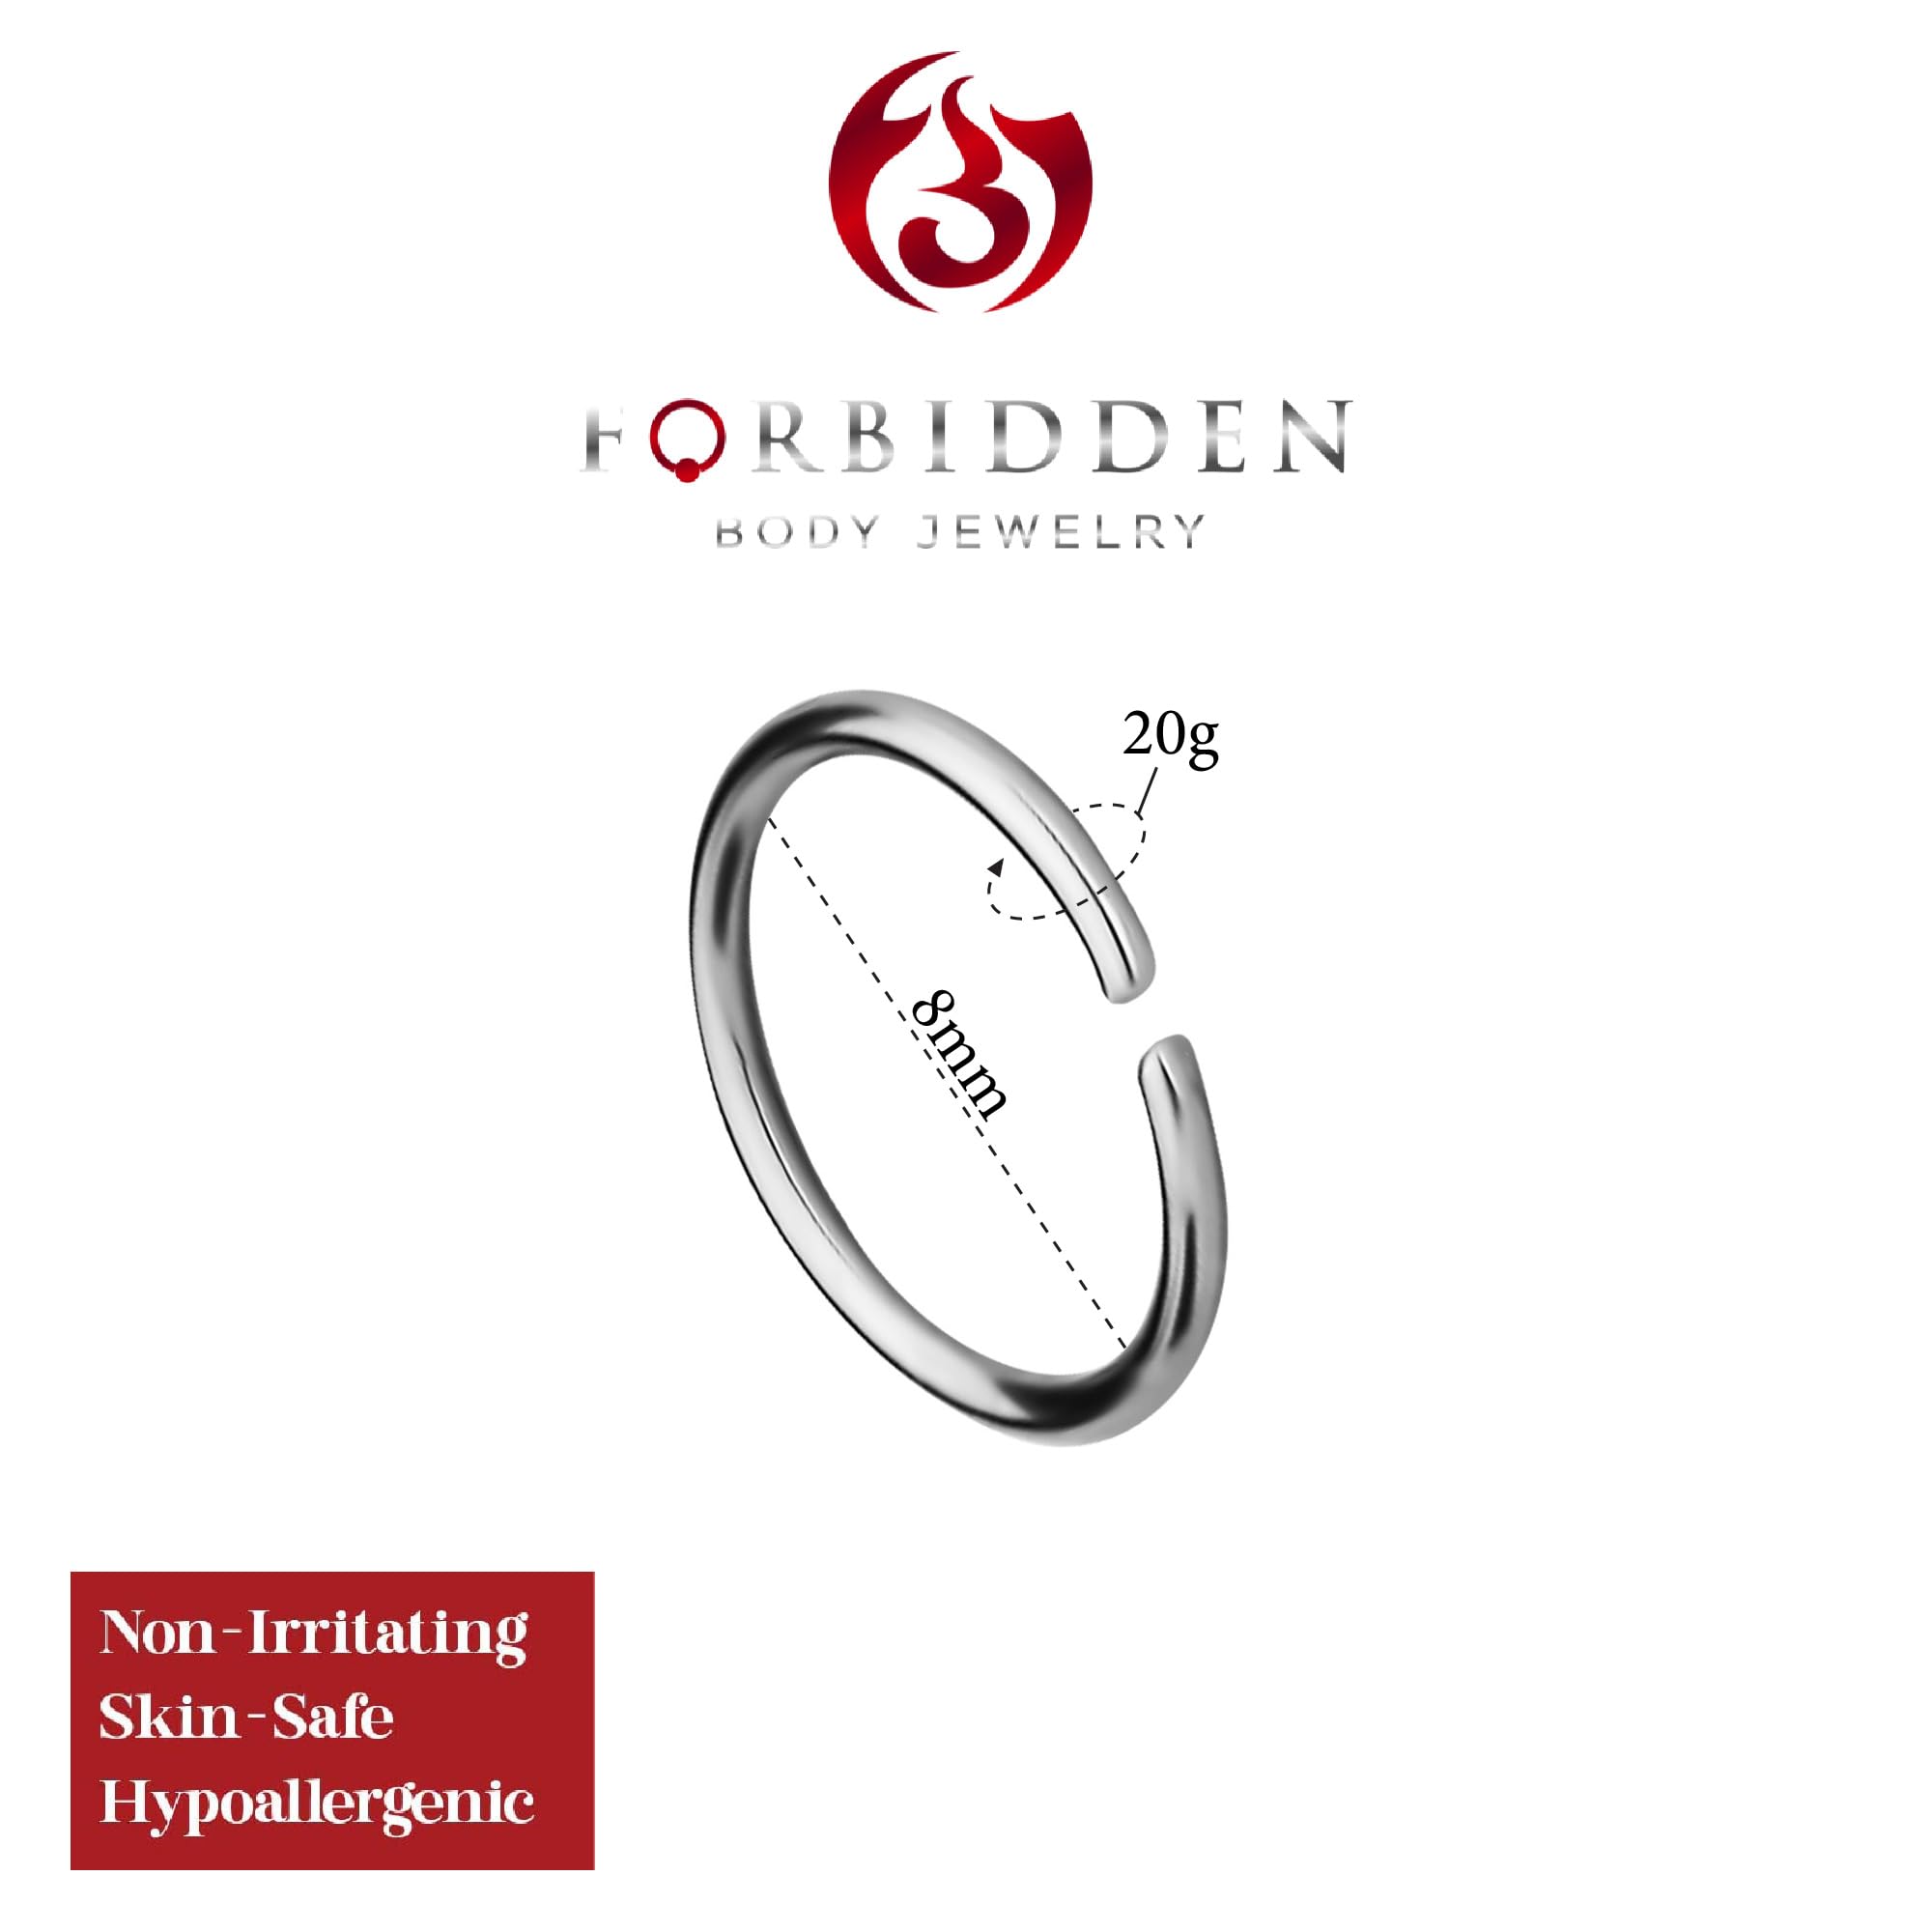 Forbidden Body Jewelry 18G -20G Surgical Steel Seamless Nose Ring or Cartilage Hoop with Comfort Round Ends (Sold Individually)